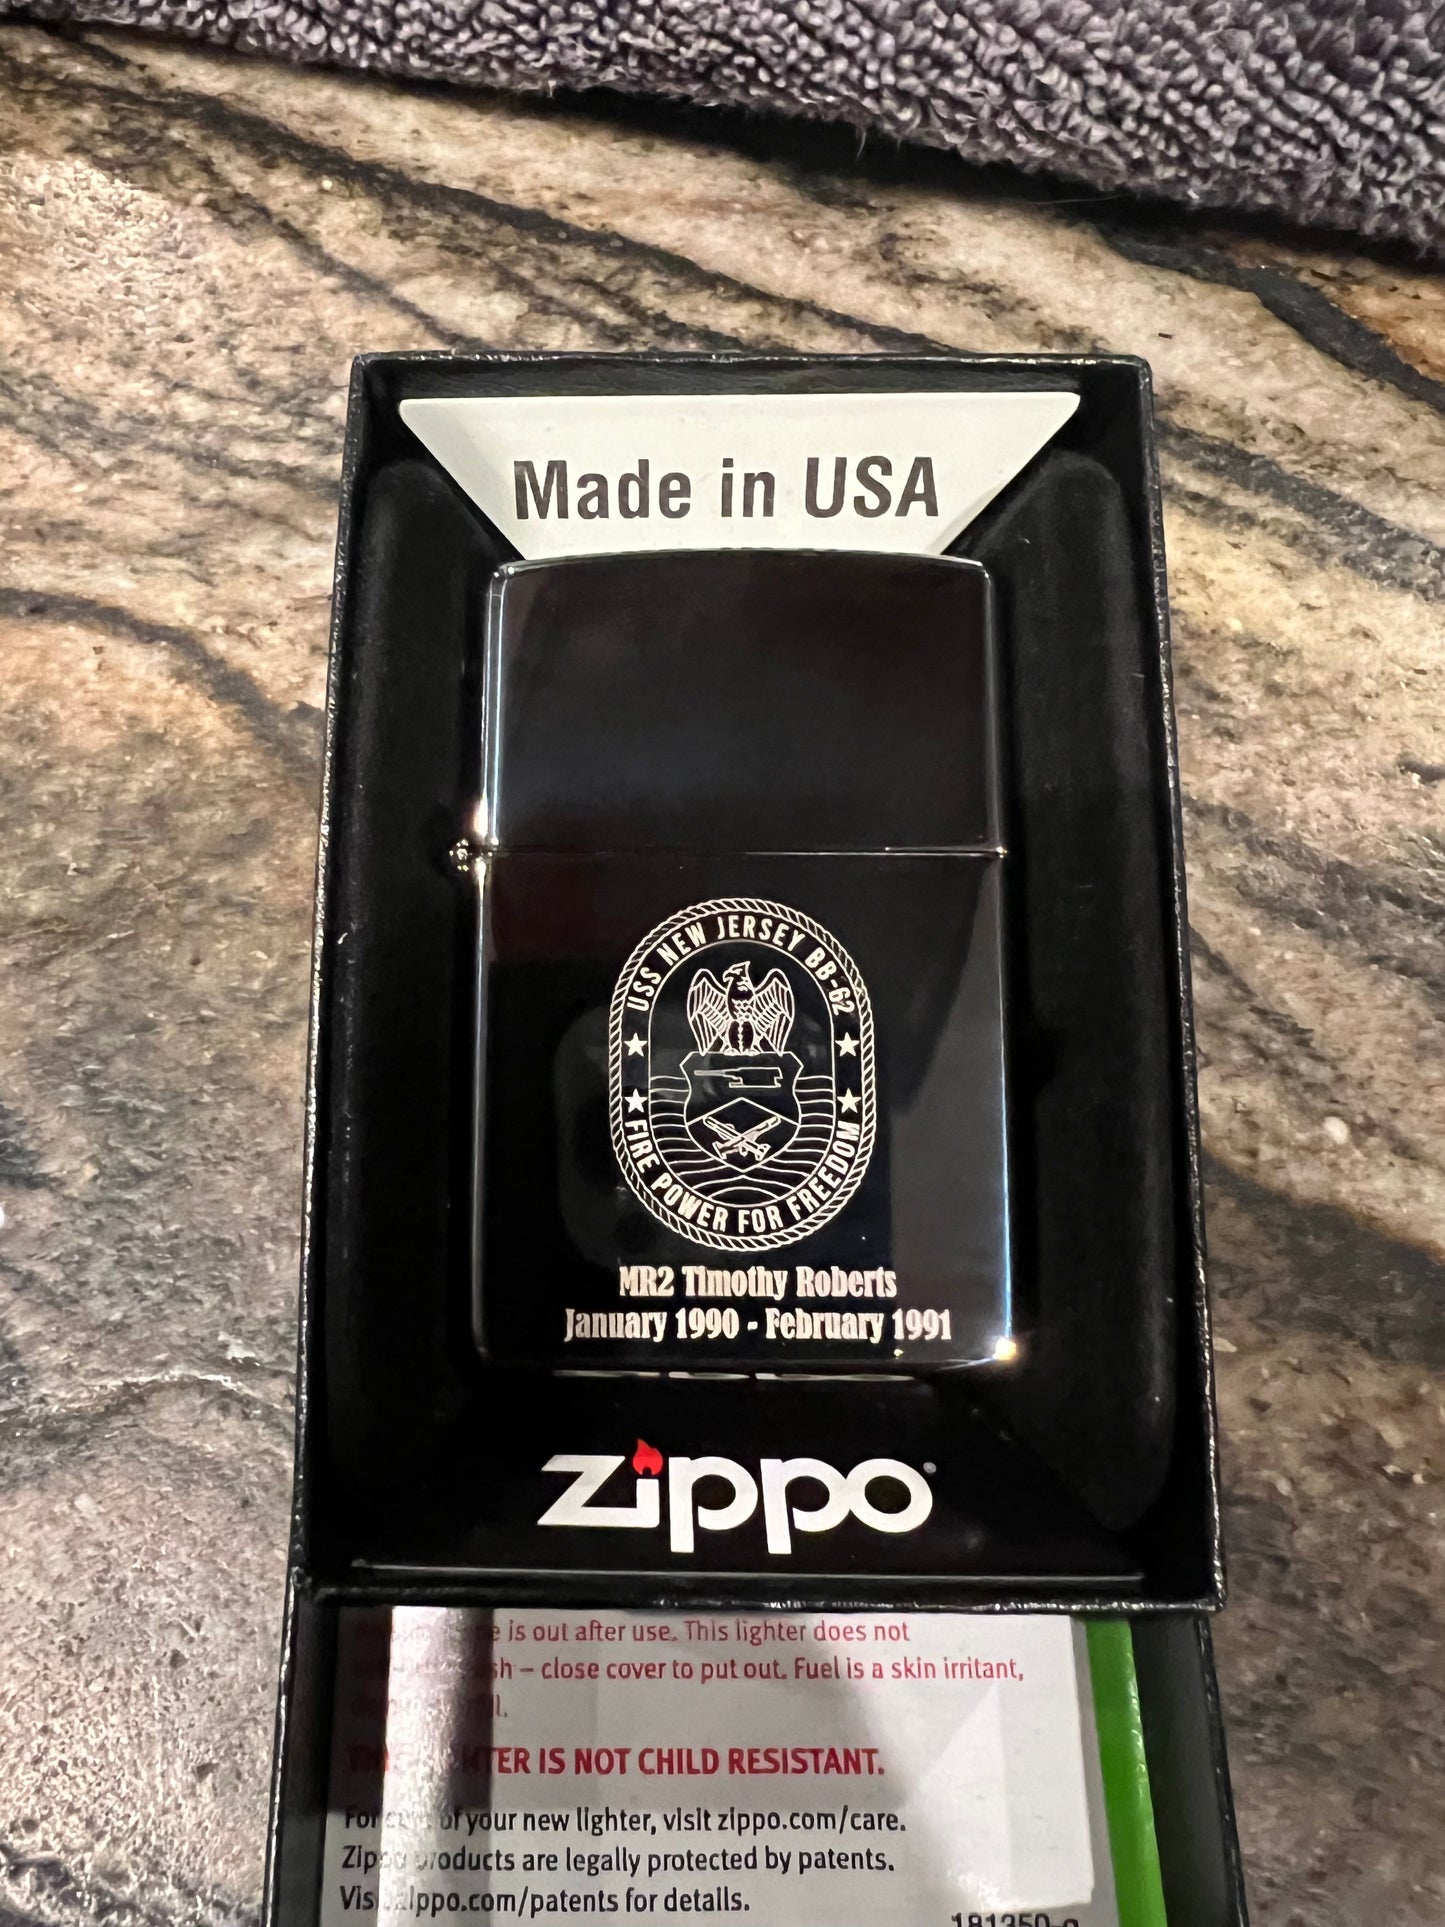 Hard to find ships zippo lighter personalized.